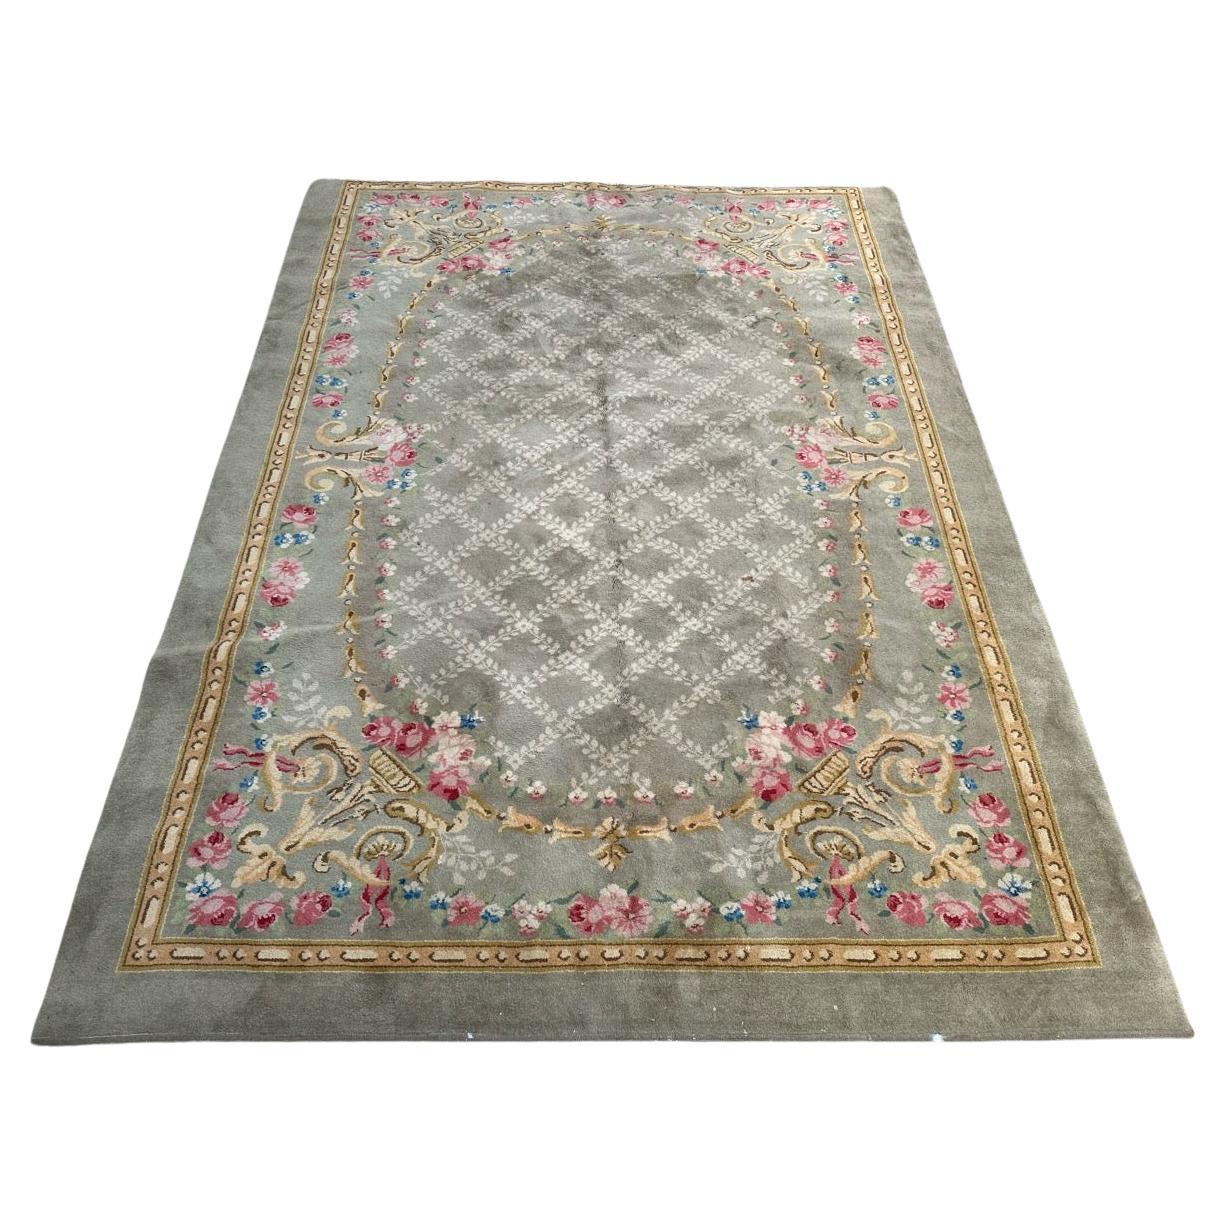 very beautiful large French hand knotted Aubusson rug savonnerie style